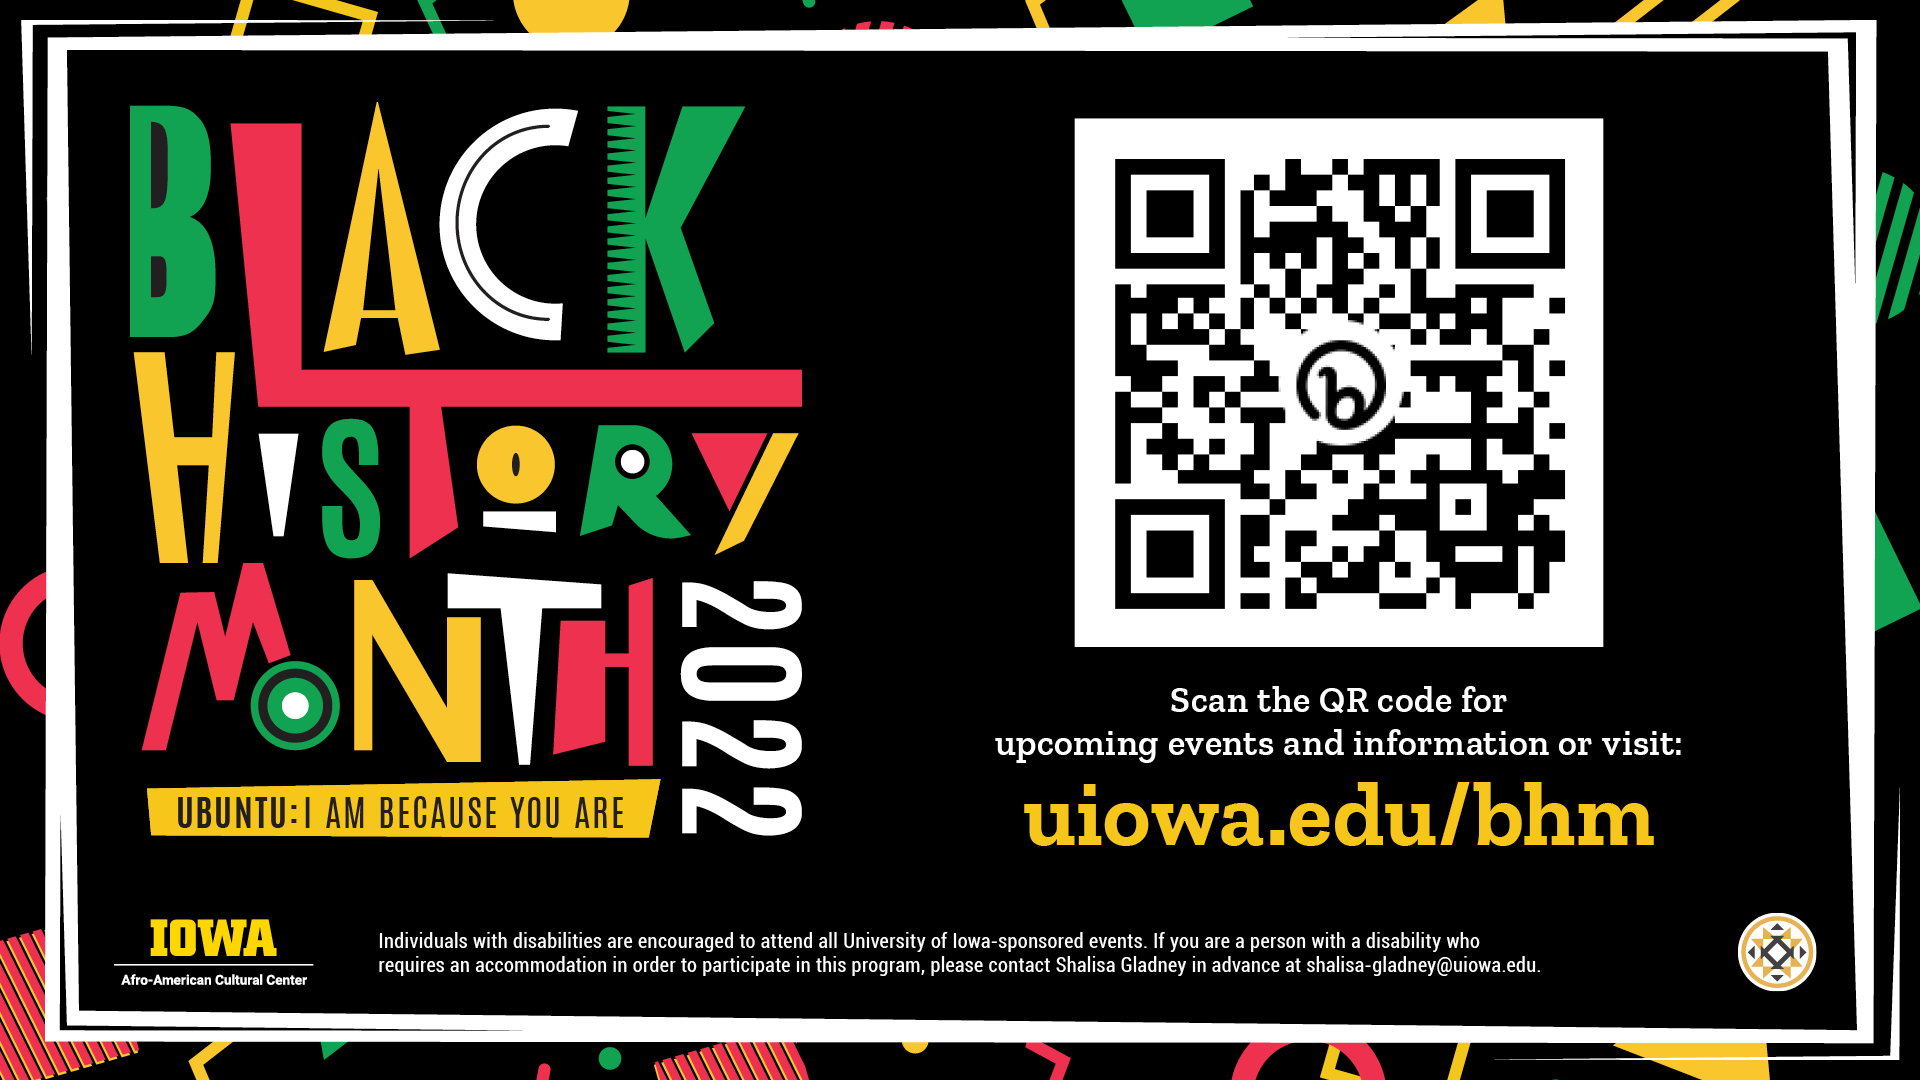 Black History Month 2022. Scan the QR code for upcoming events and information or visit: uiowa.edu/bhm 